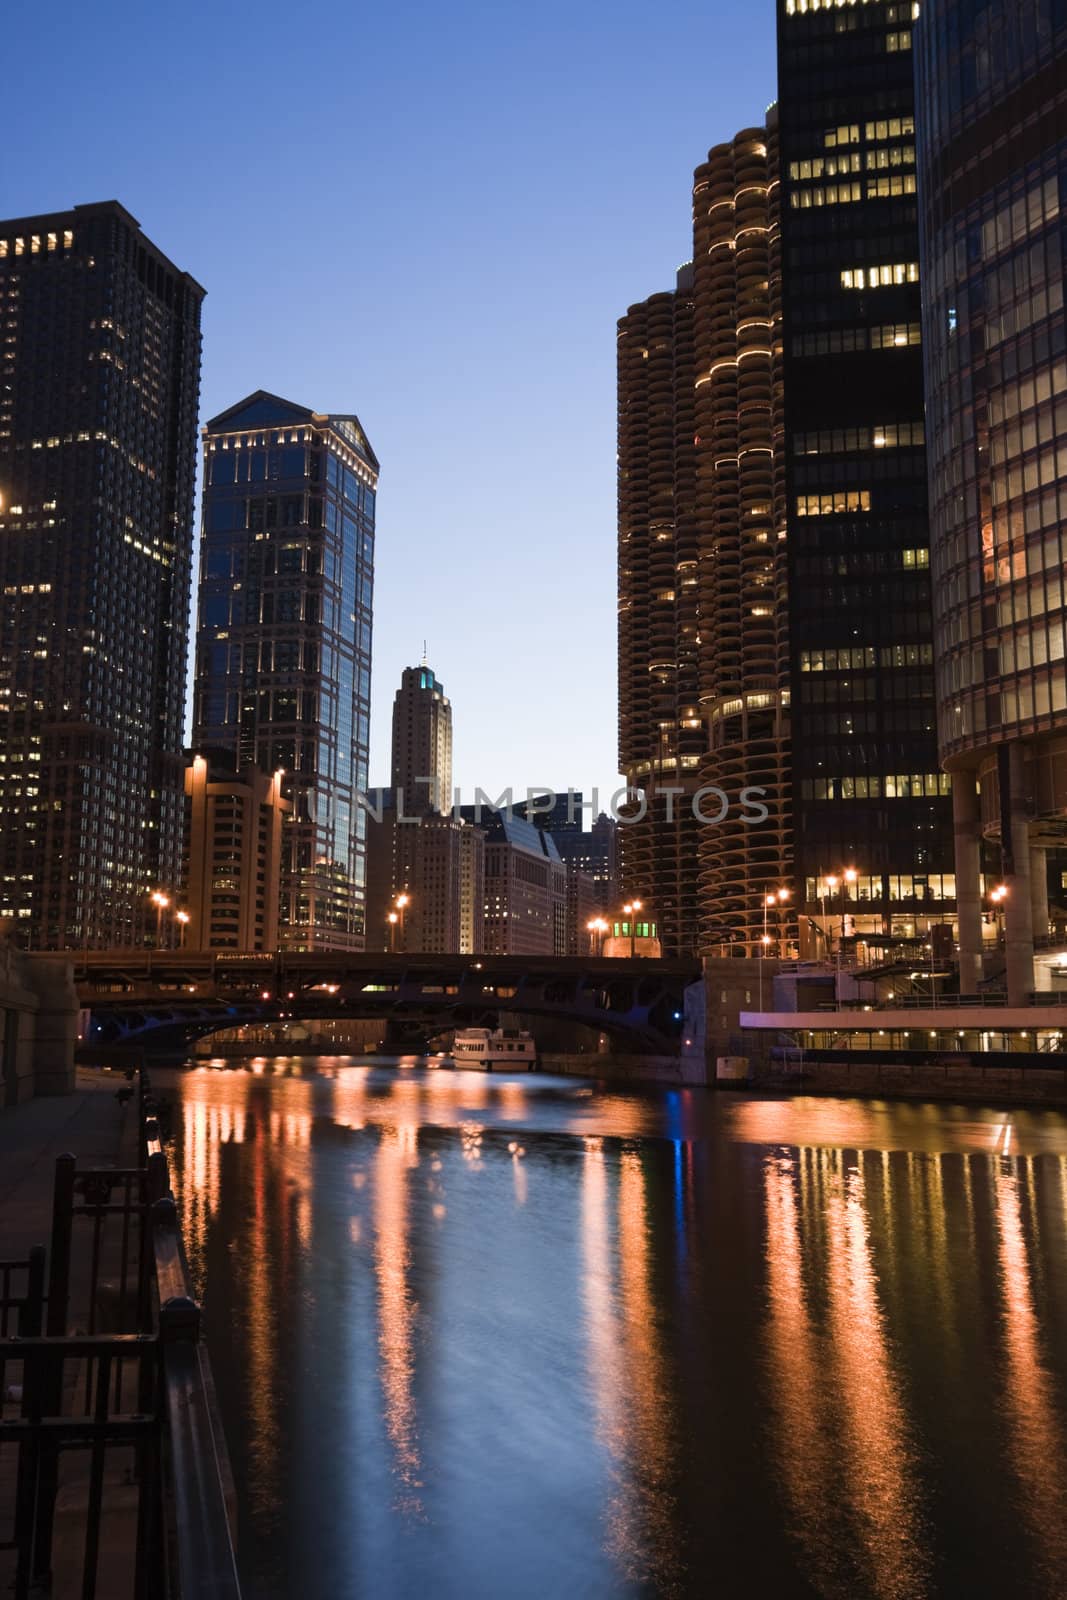 Chicago from the river by benkrut